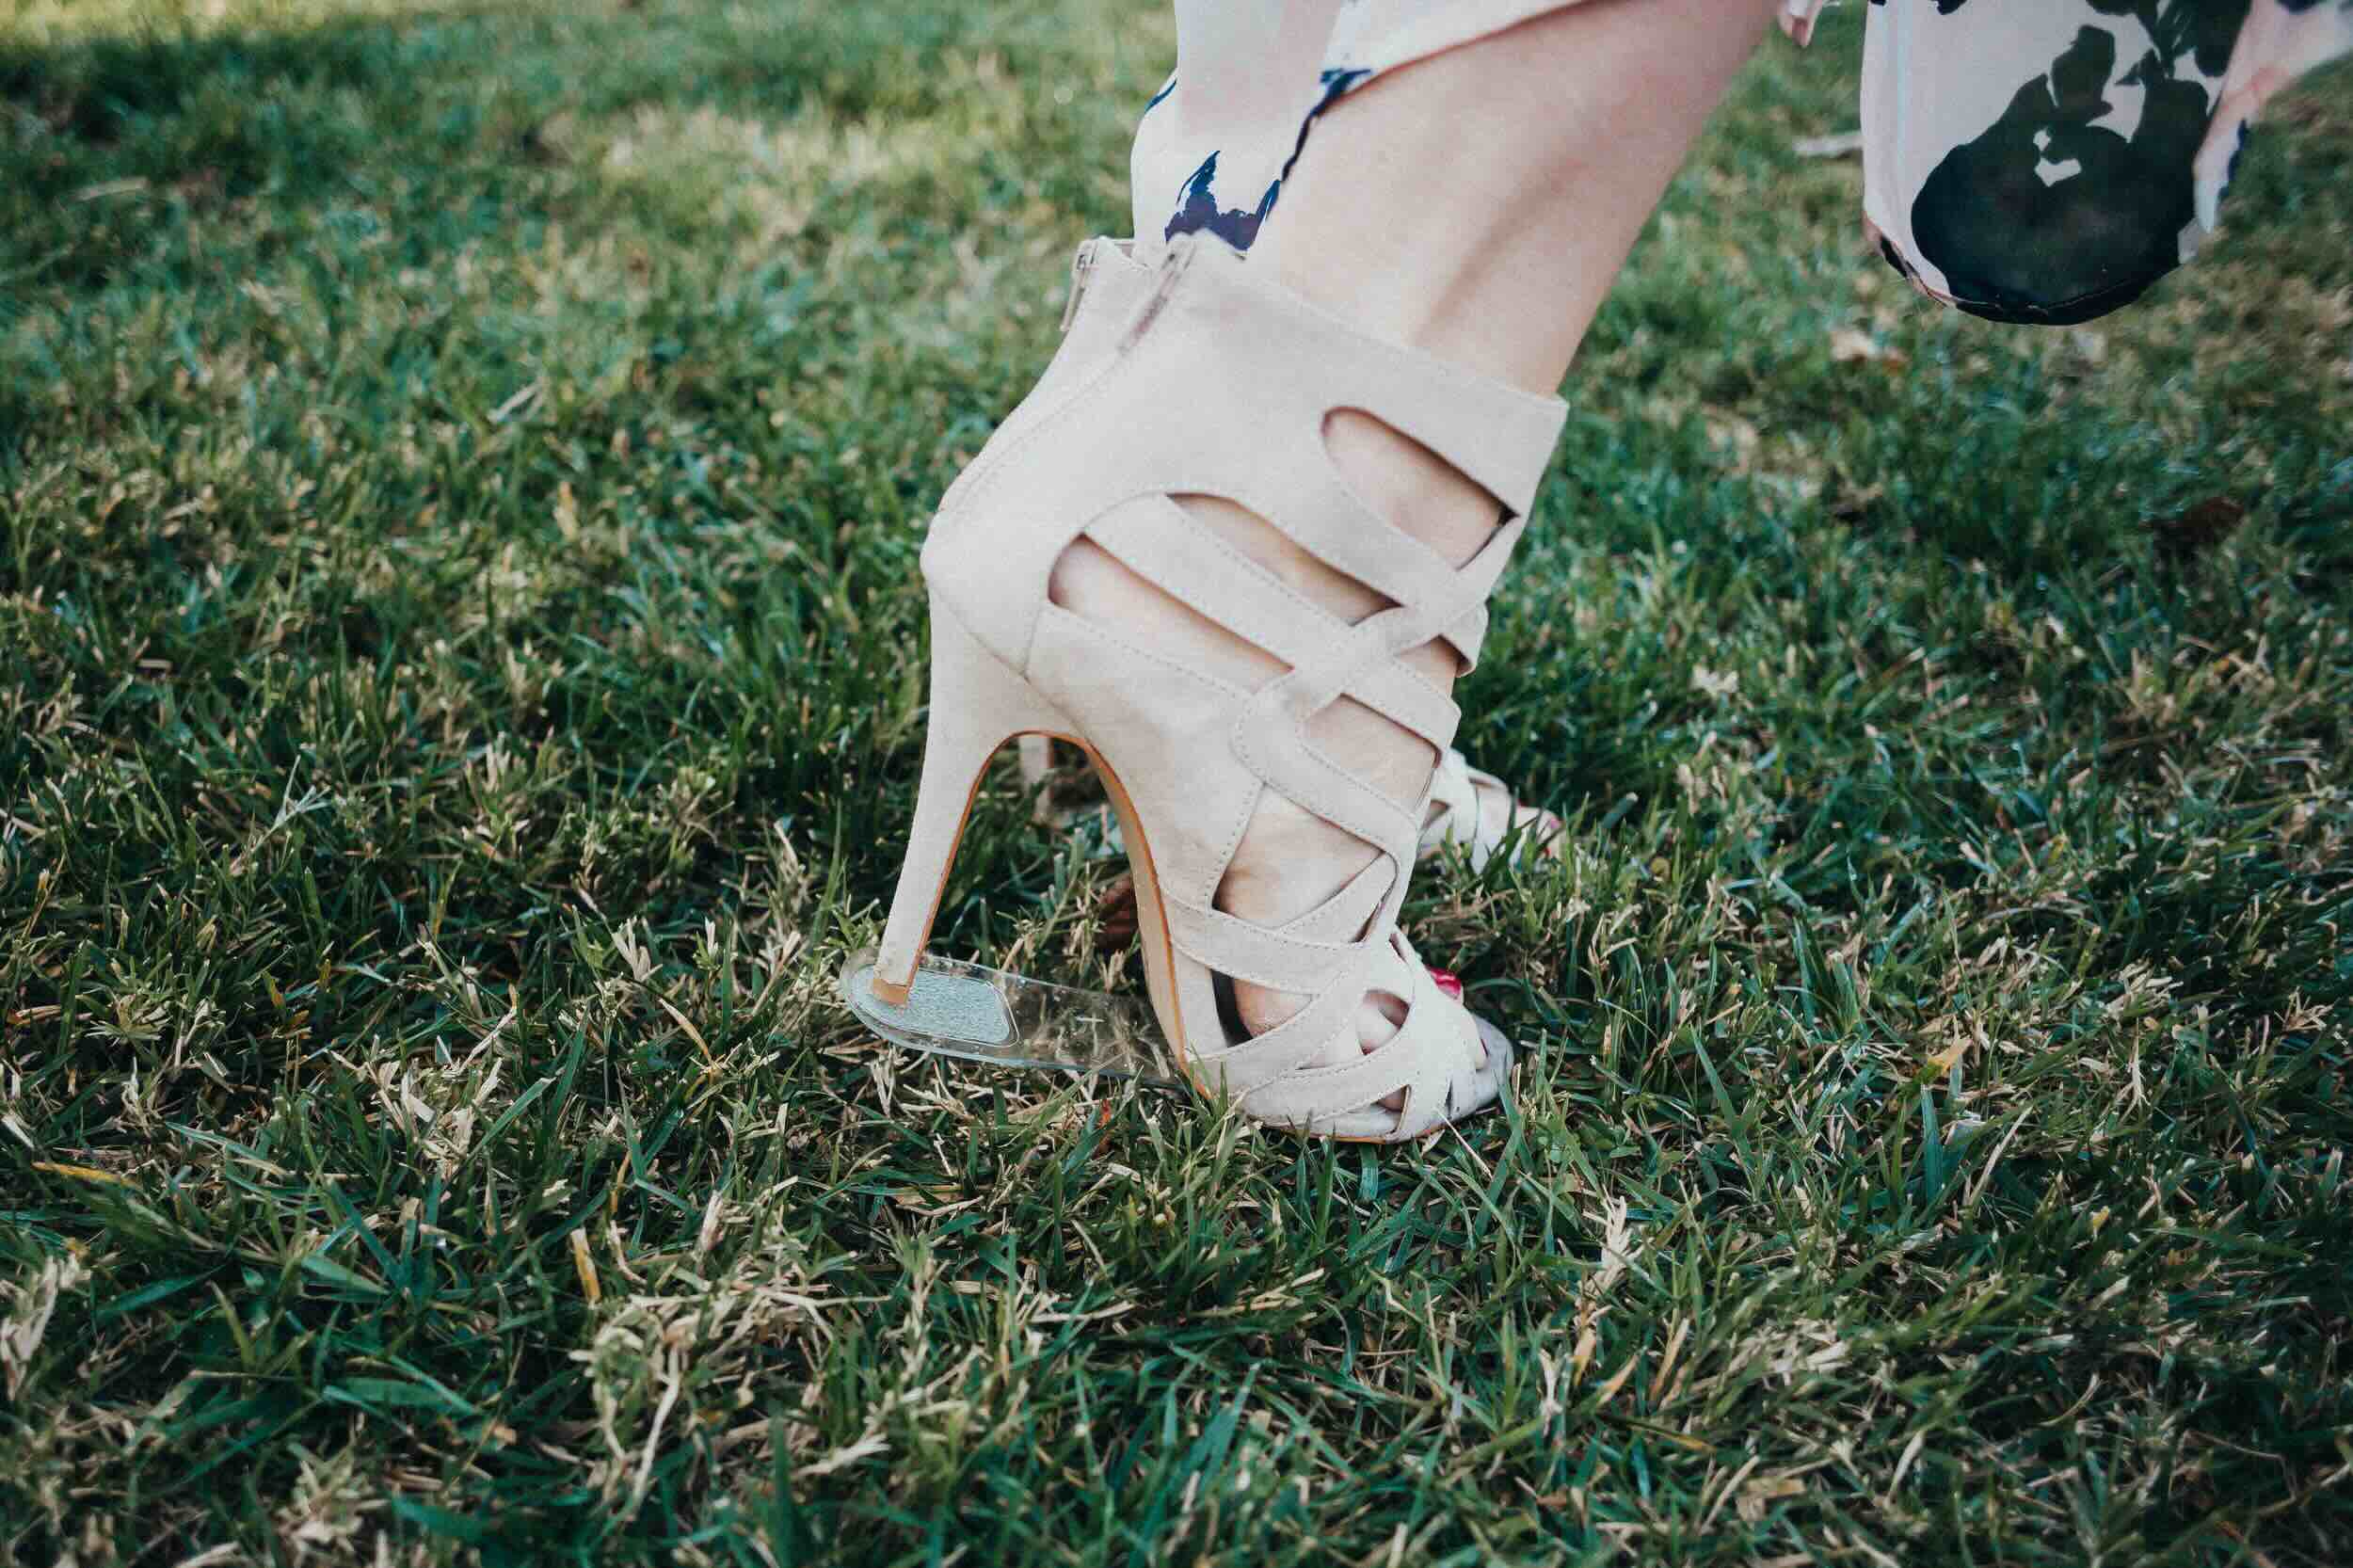 How To Walk In Heels On Grass